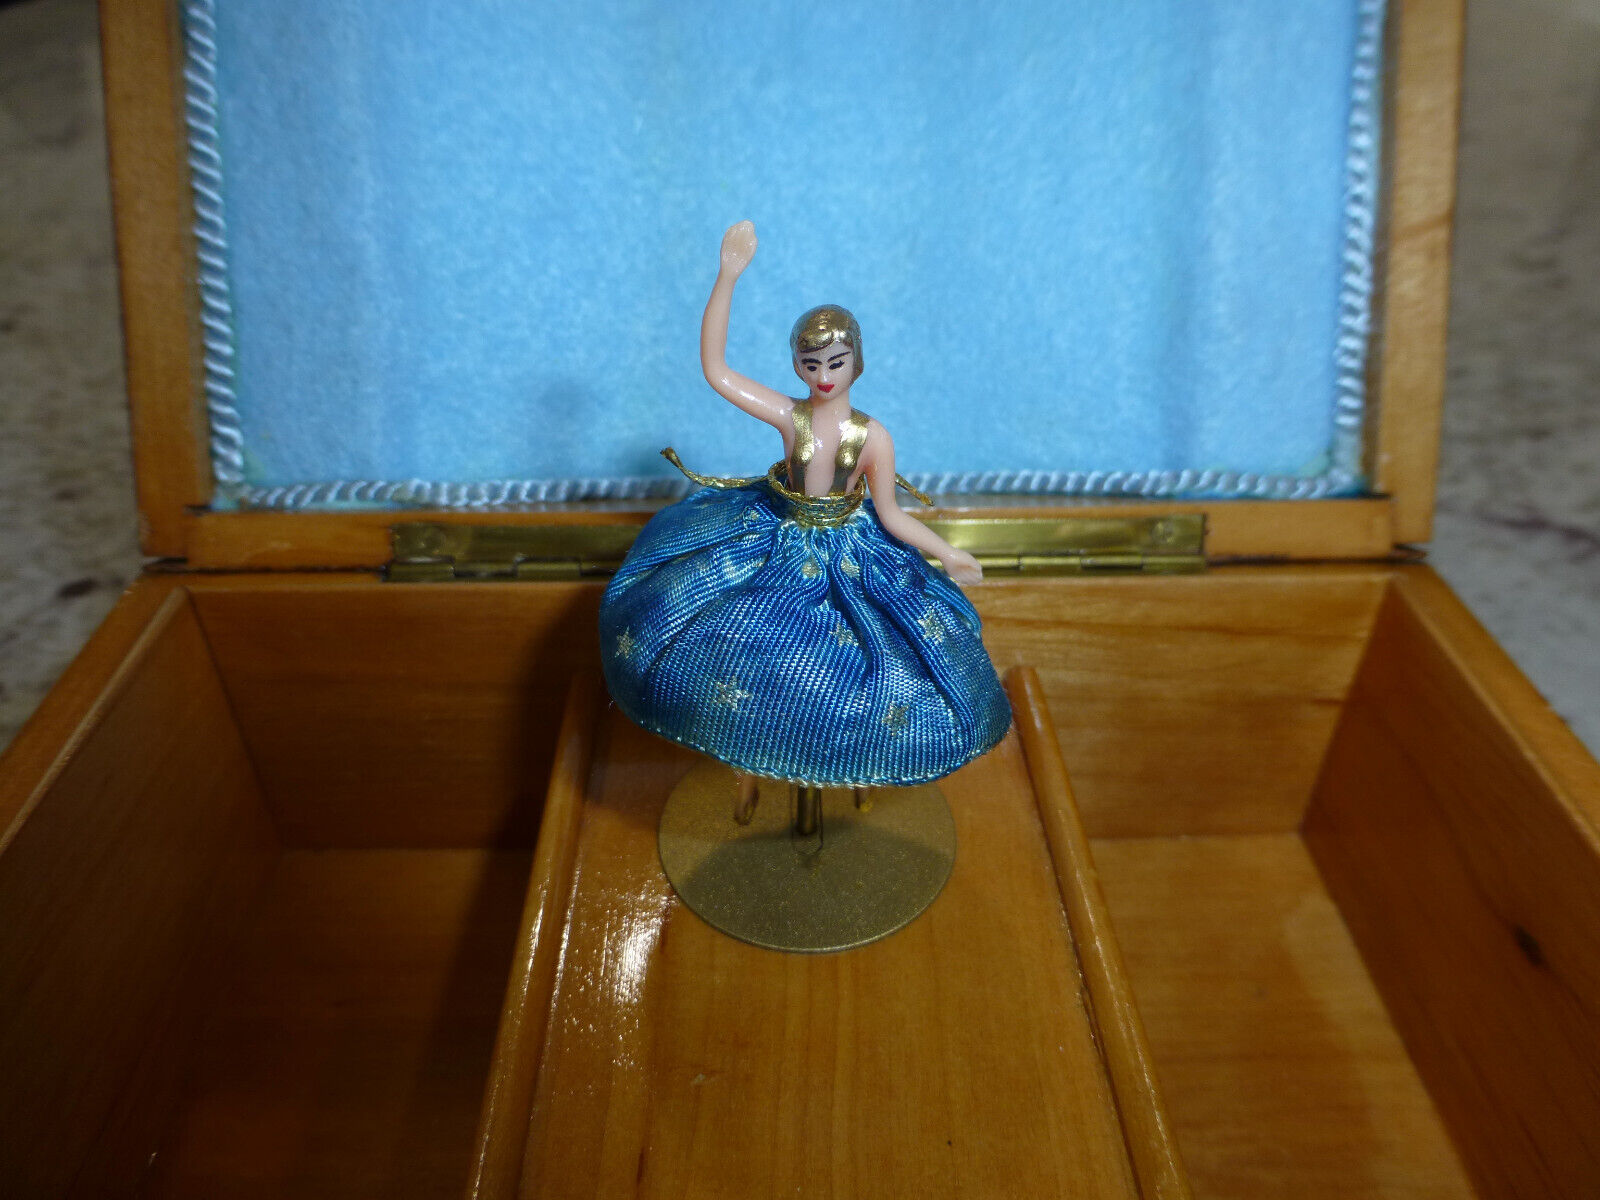 EXC VINTAGE REUGE DANCING BALLERINA MUSIC JEWELRY BOX JUST SERVICED (SEE VIDEO)